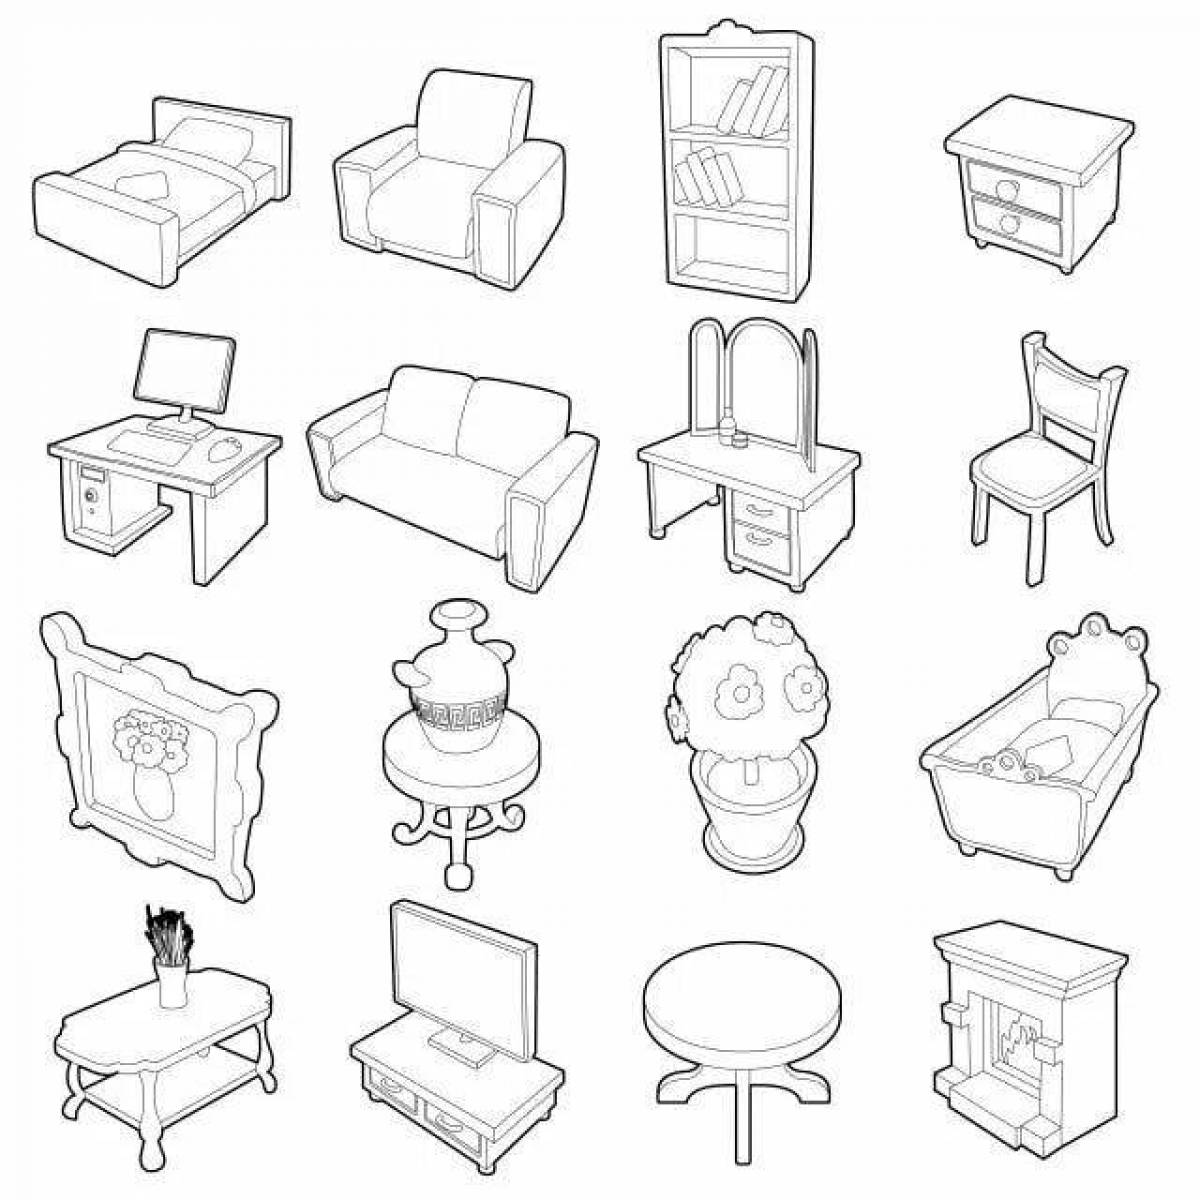 Coloring book furniture for dolls